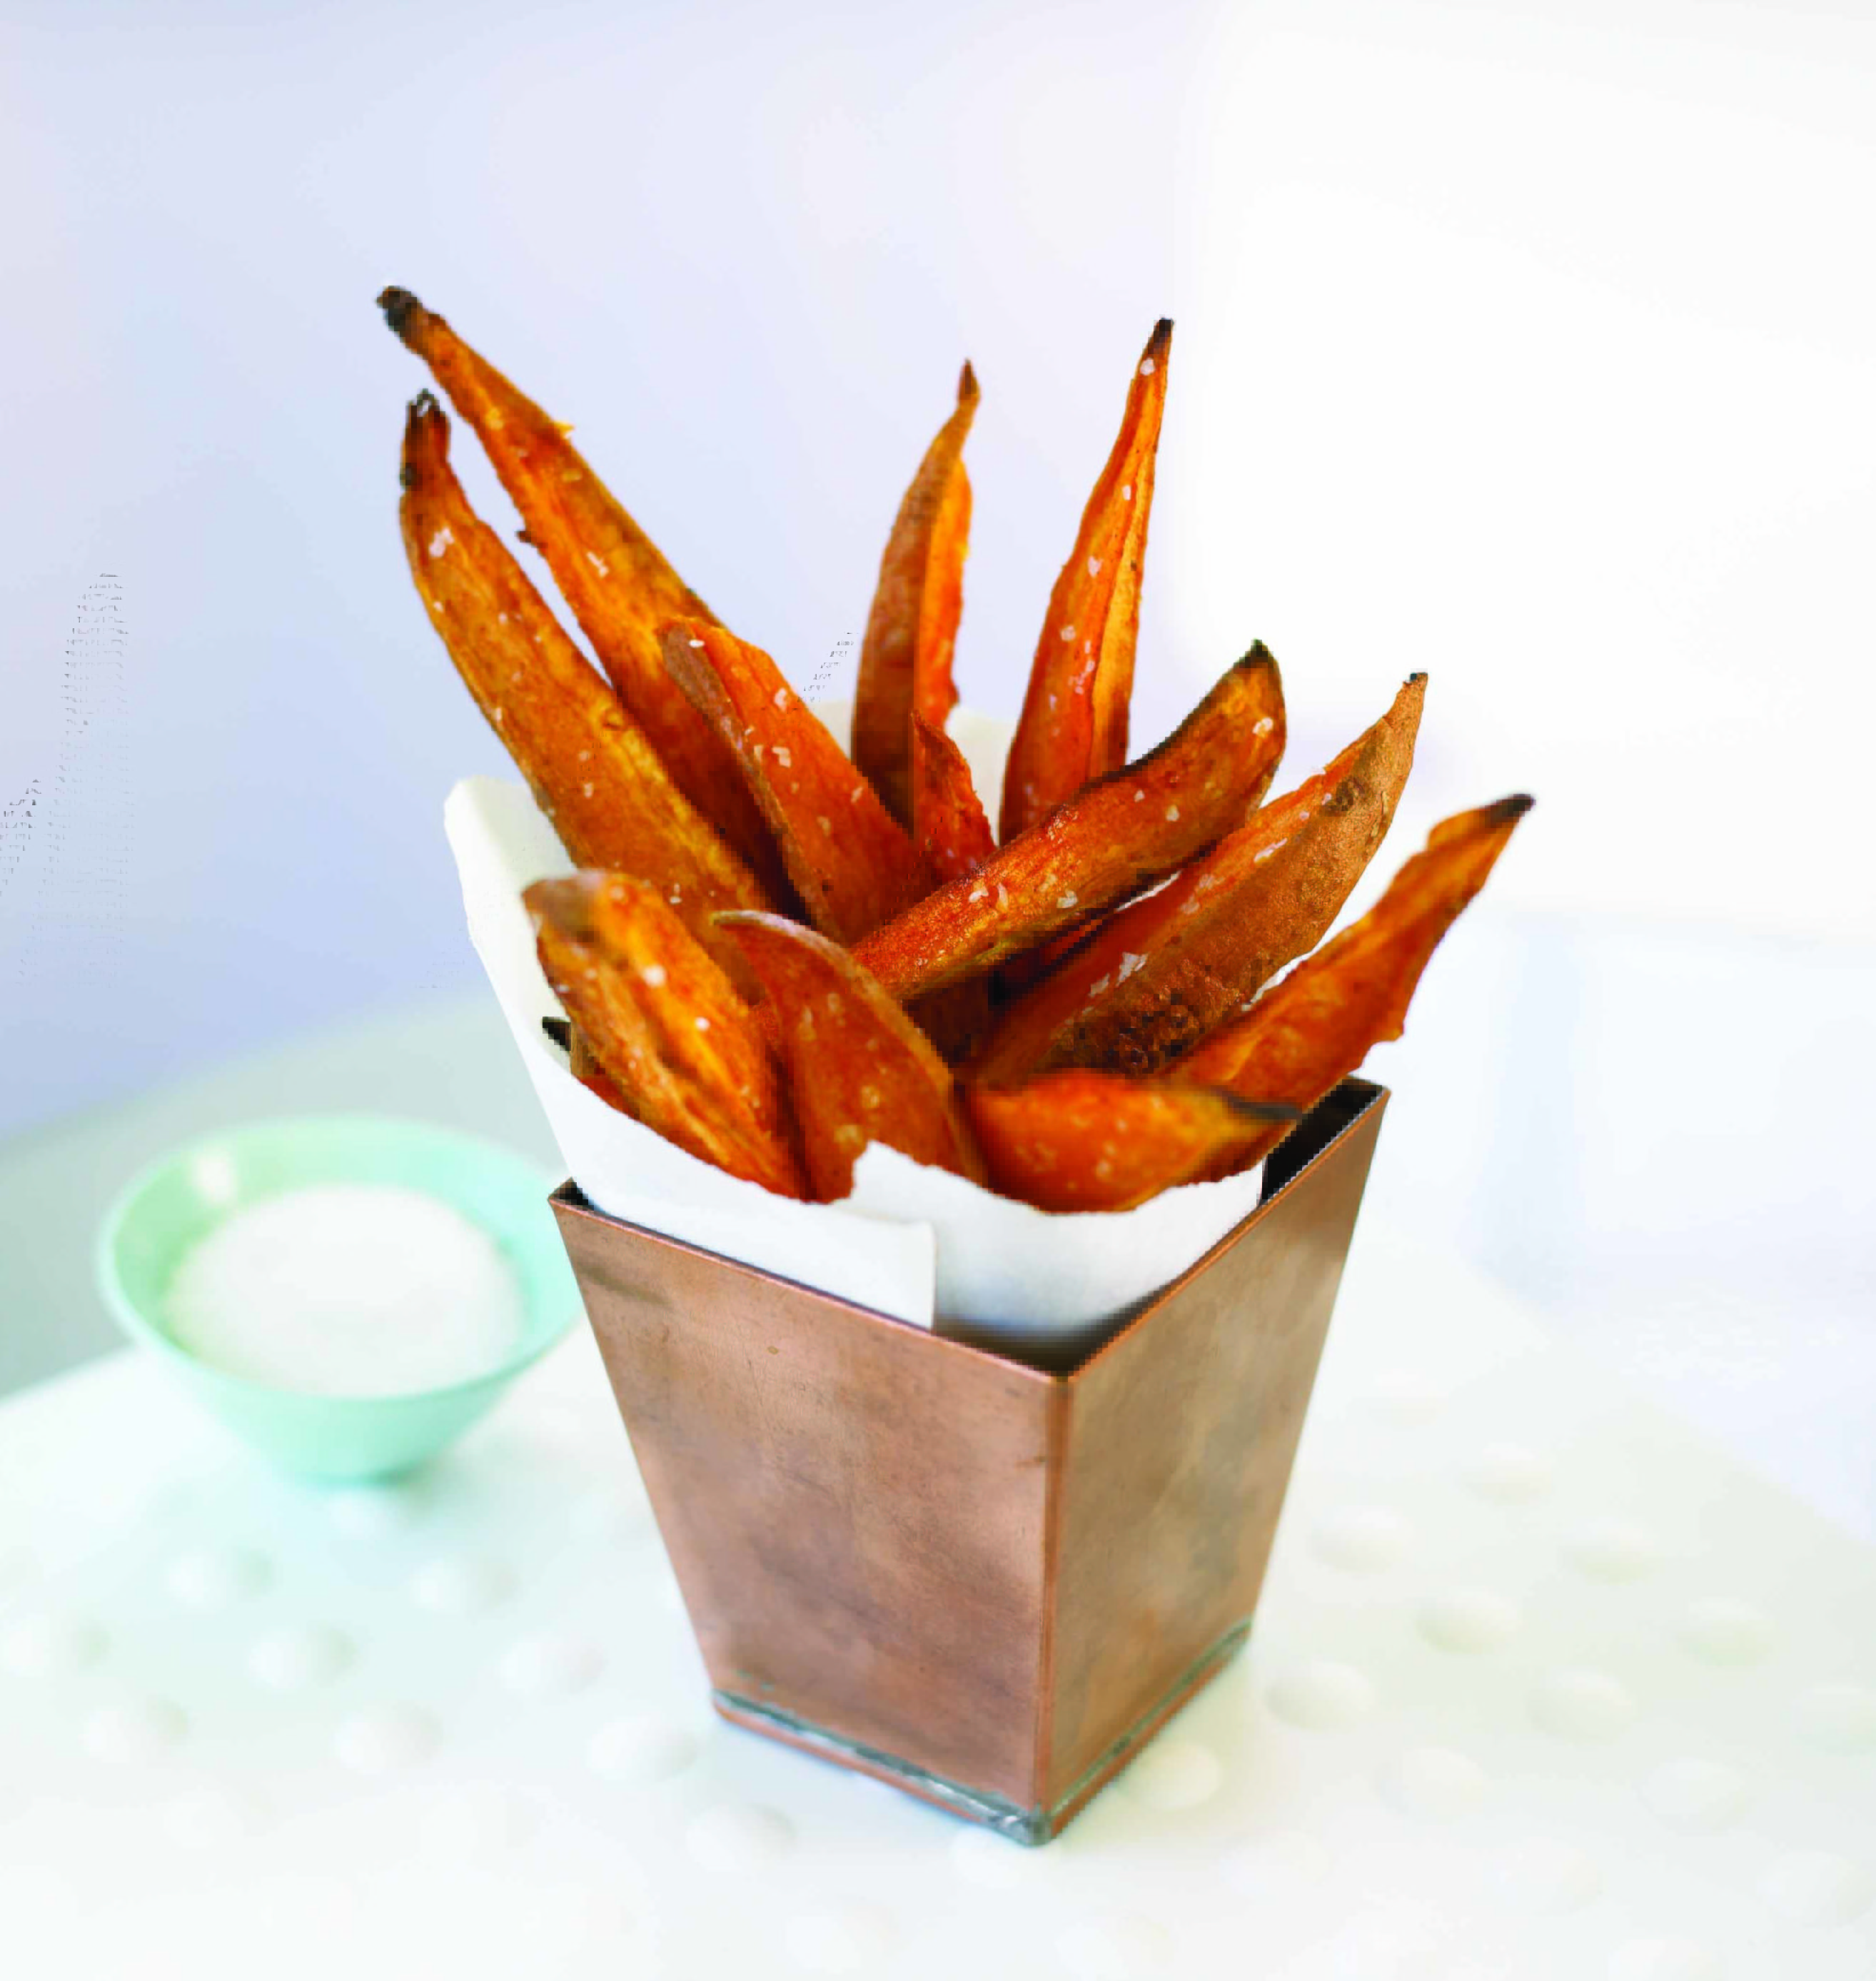 baked sweet potato fries in a metal container